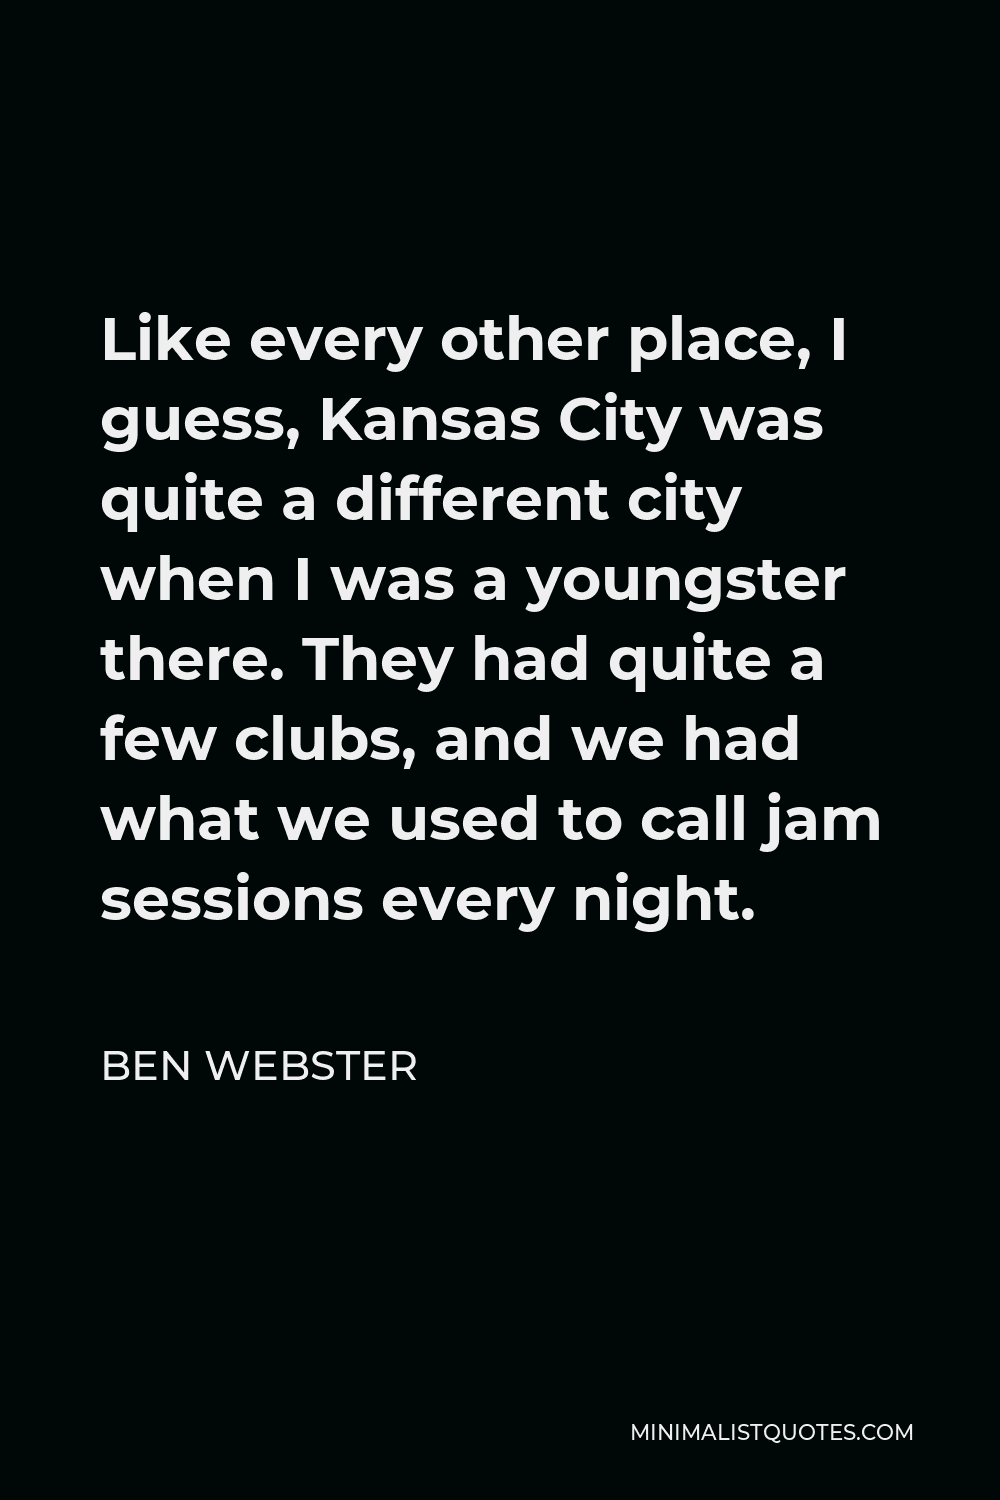 Ben Webster Quote - Like every other place, I guess, Kansas City was quite a different city when I was a youngster there. They had quite a few clubs, and we had what we used to call jam sessions every night.